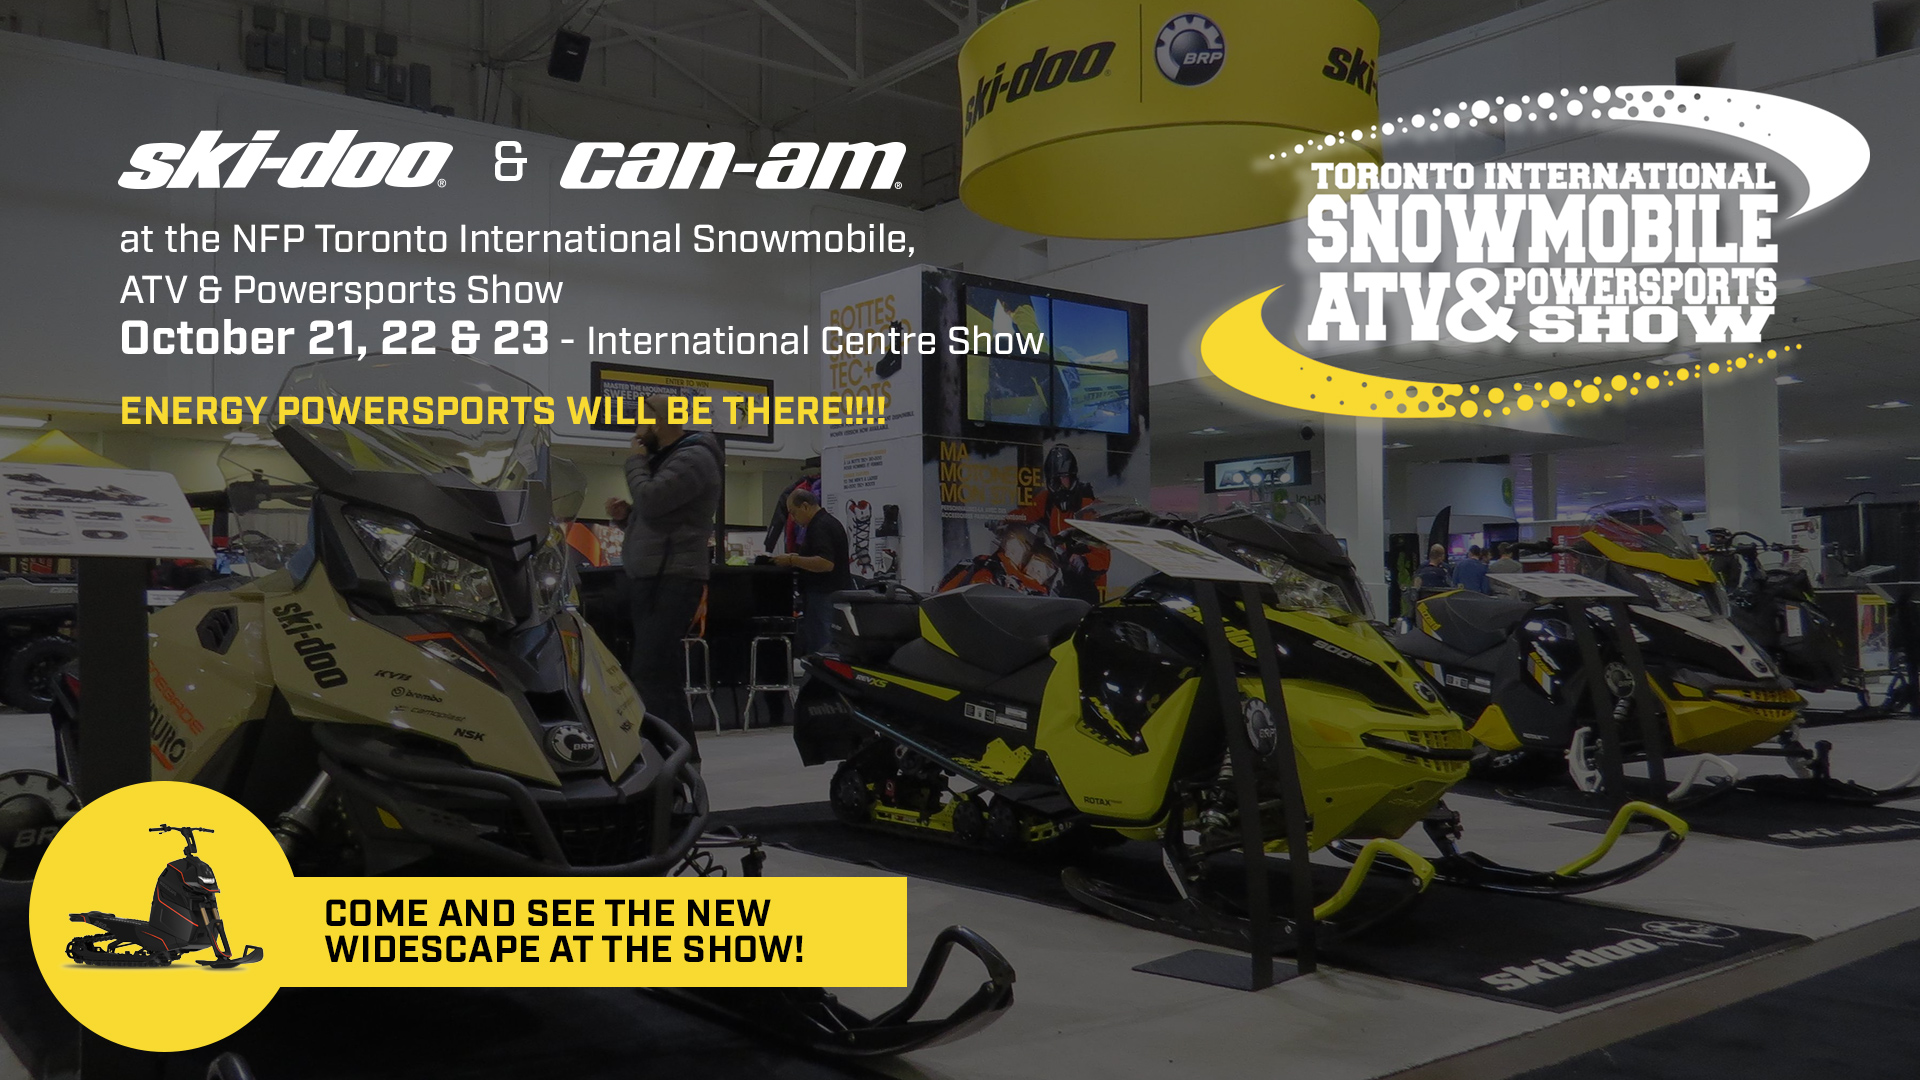 Ski-Doo and Can-Am at the NFP Toronto International Snowmobile, ATV & Powersports Show